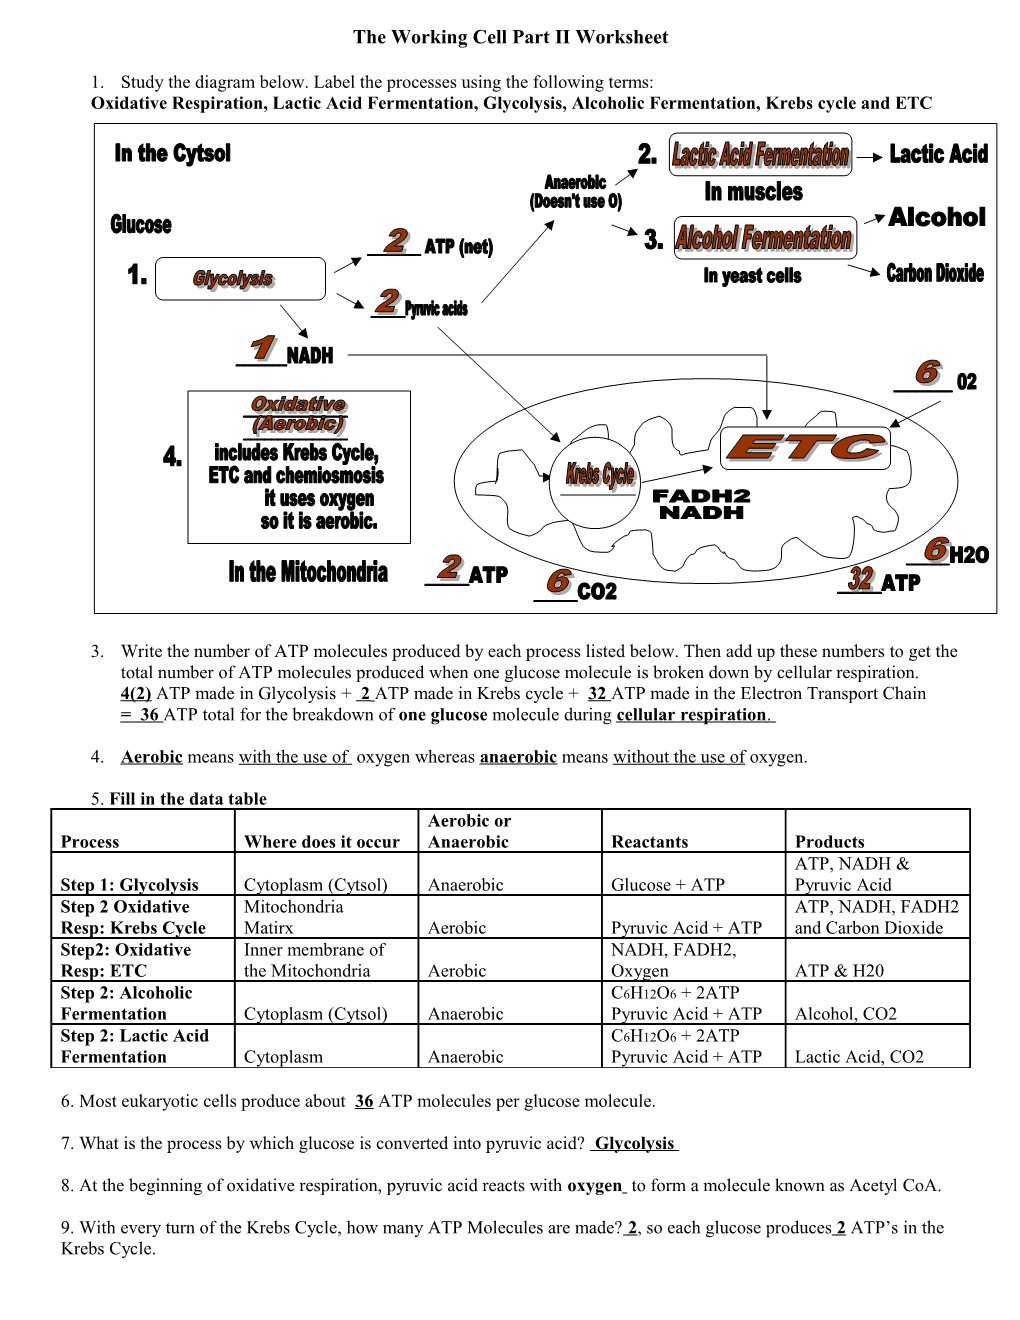 The Working Cell Part II Worksheet